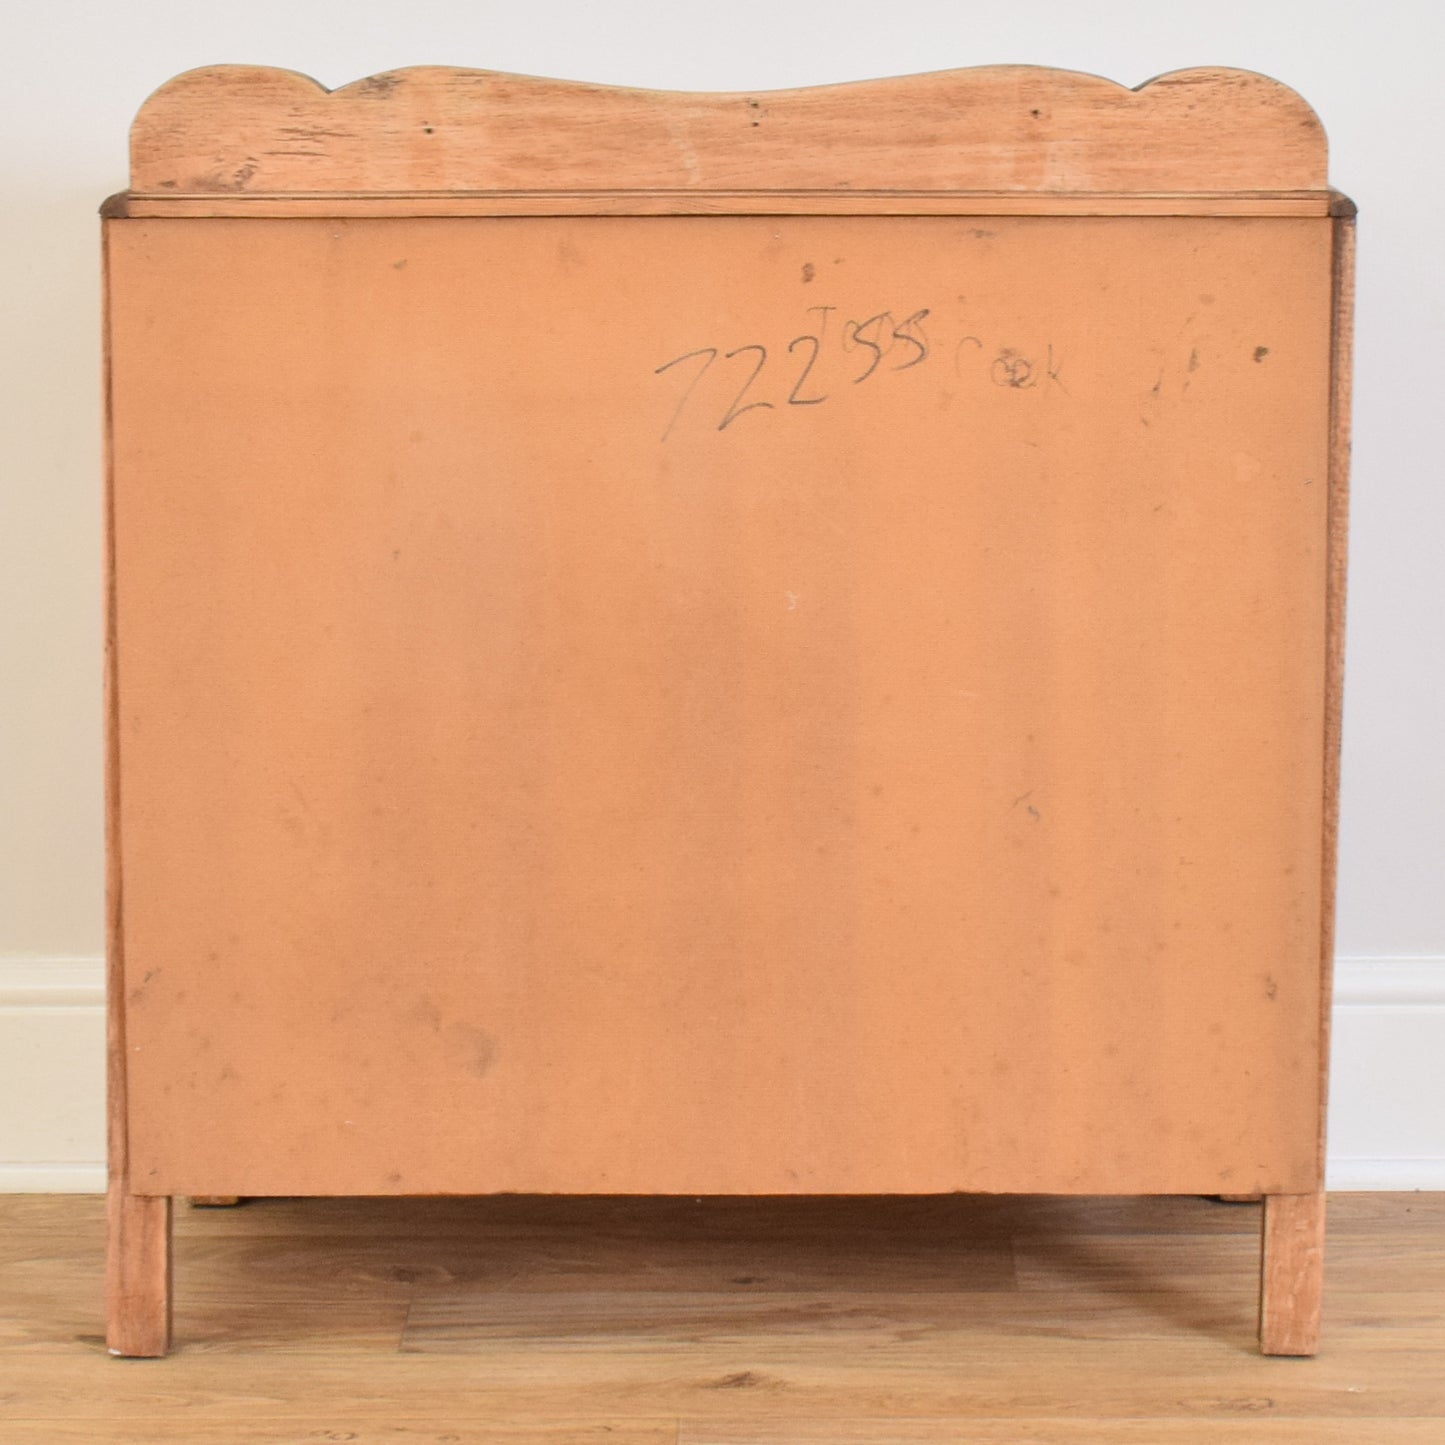 Restored Chest of Drawers